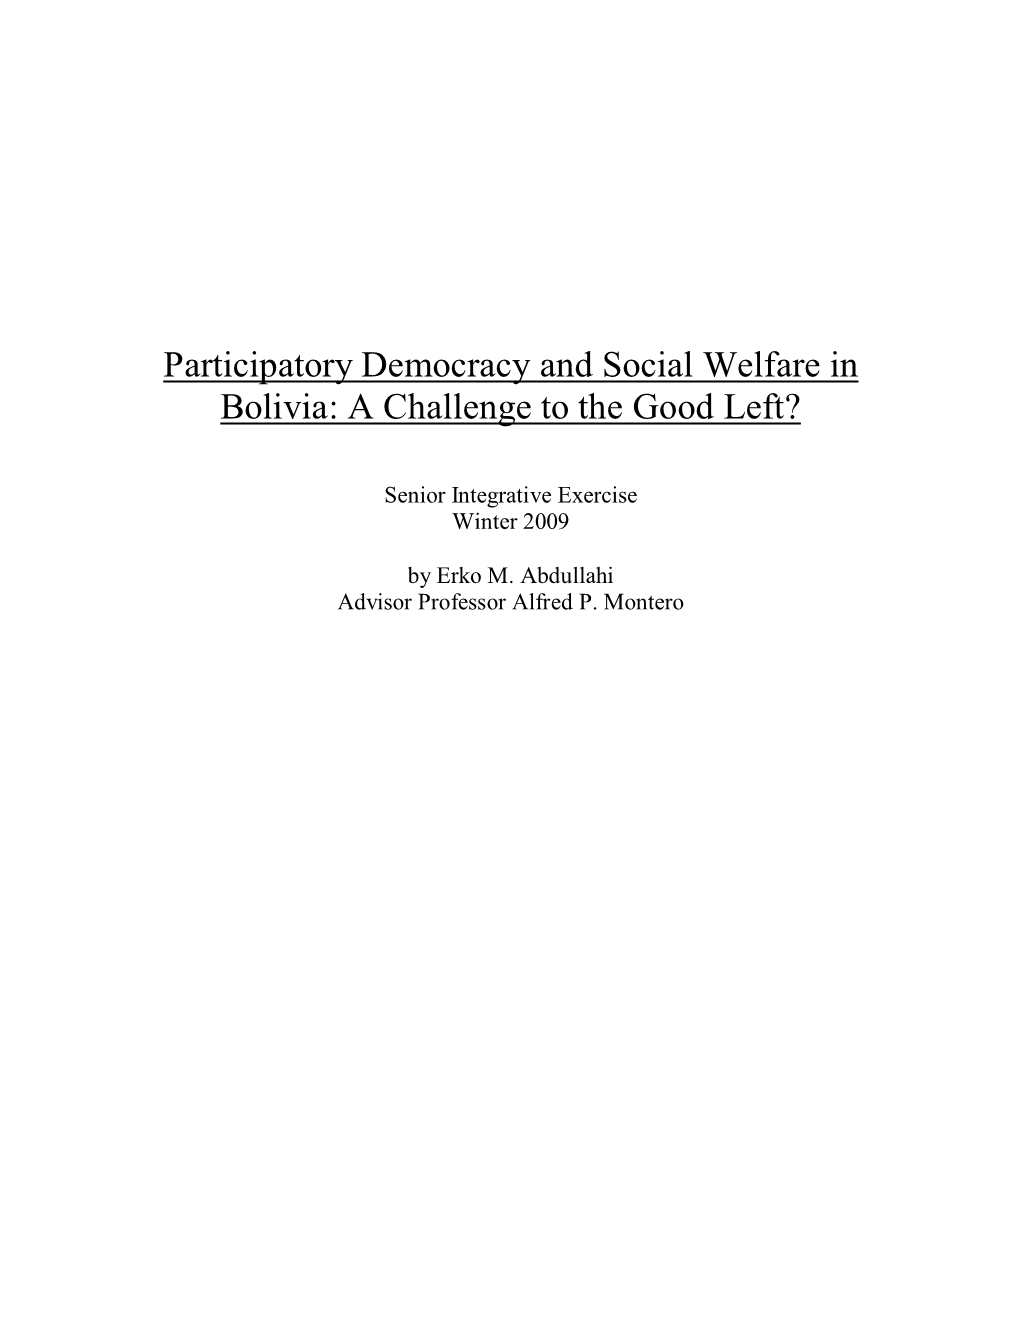 Participatory Democracy and Social Welfare in Bolivia: a Challenge to the Good Left?